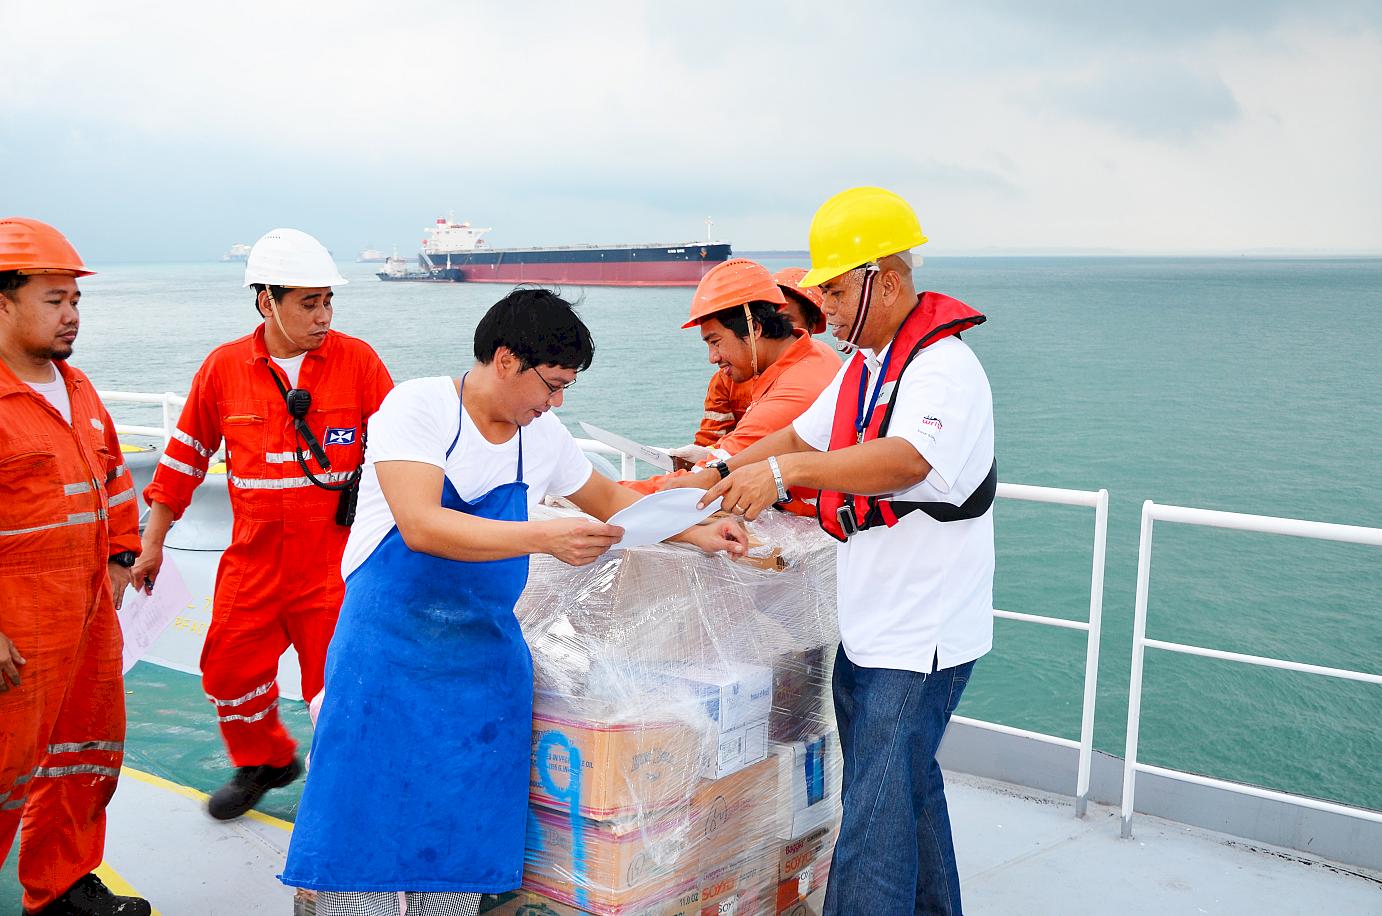 Expert care to make our customers' life at sea better and Wrist a great place to work